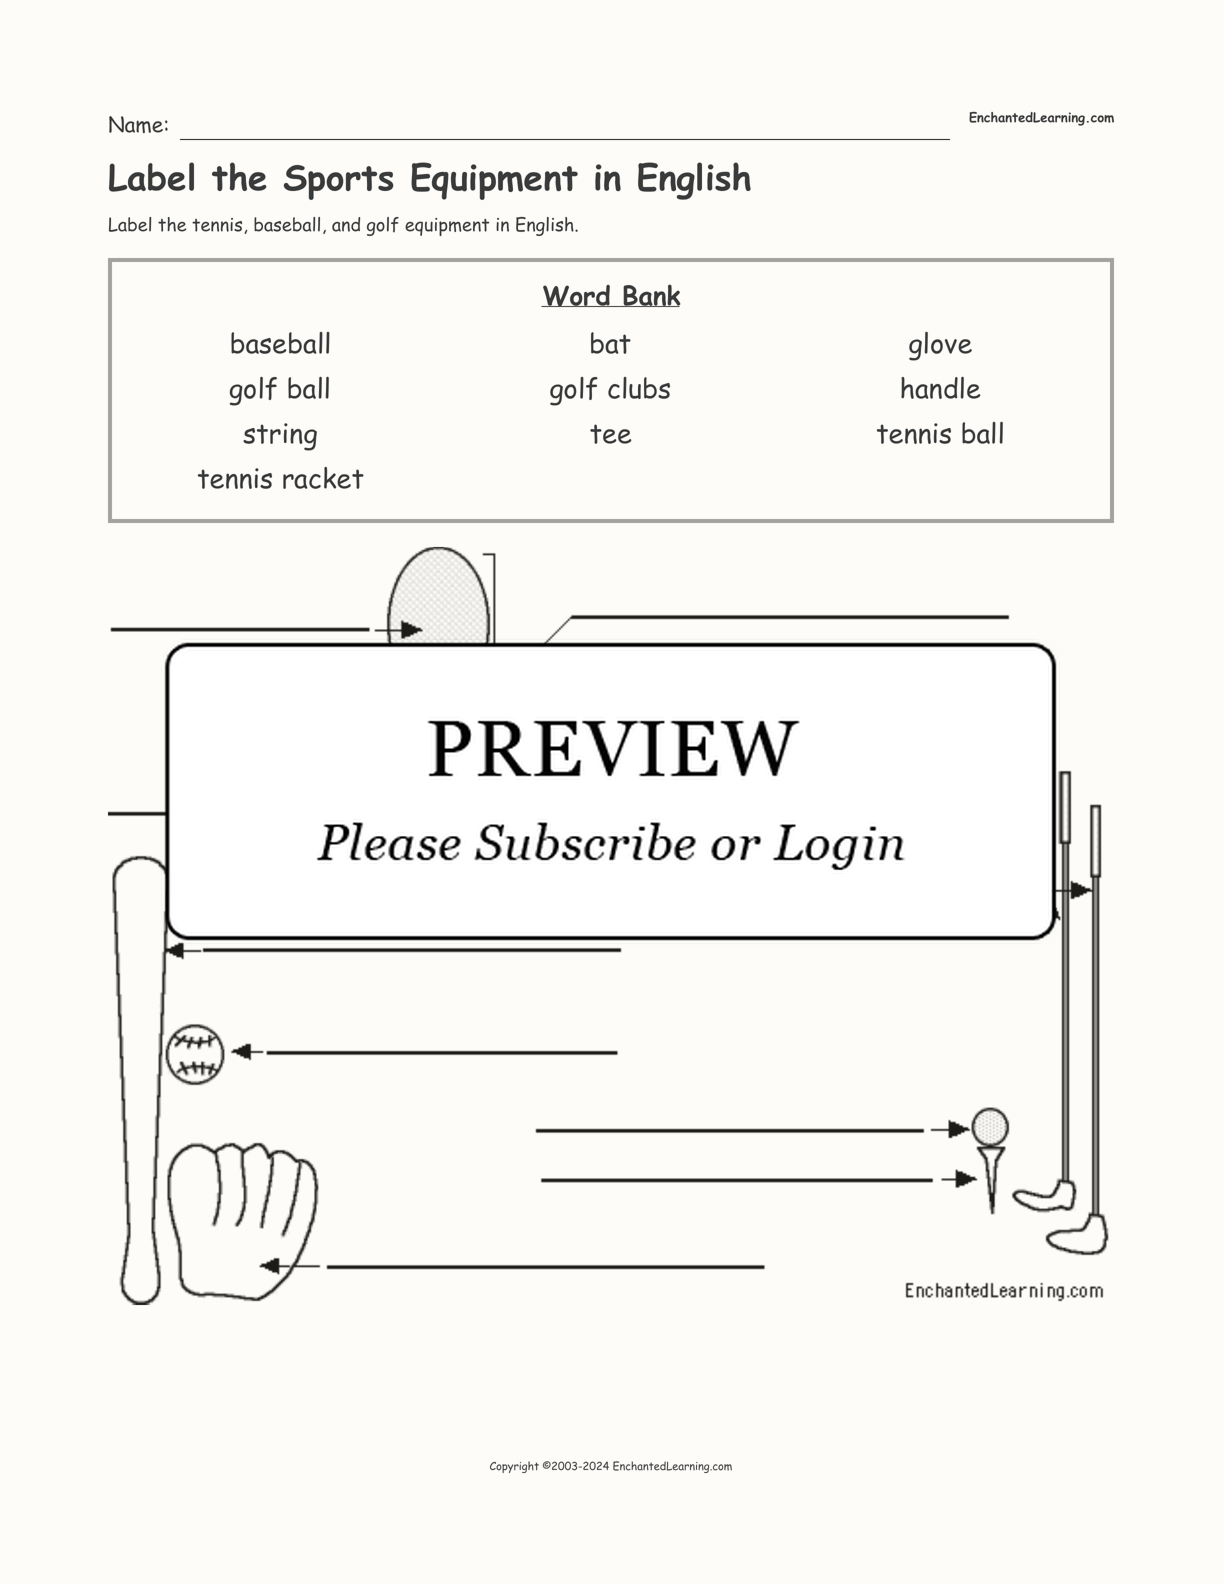 Label the Sports Equipment in English interactive worksheet page 1